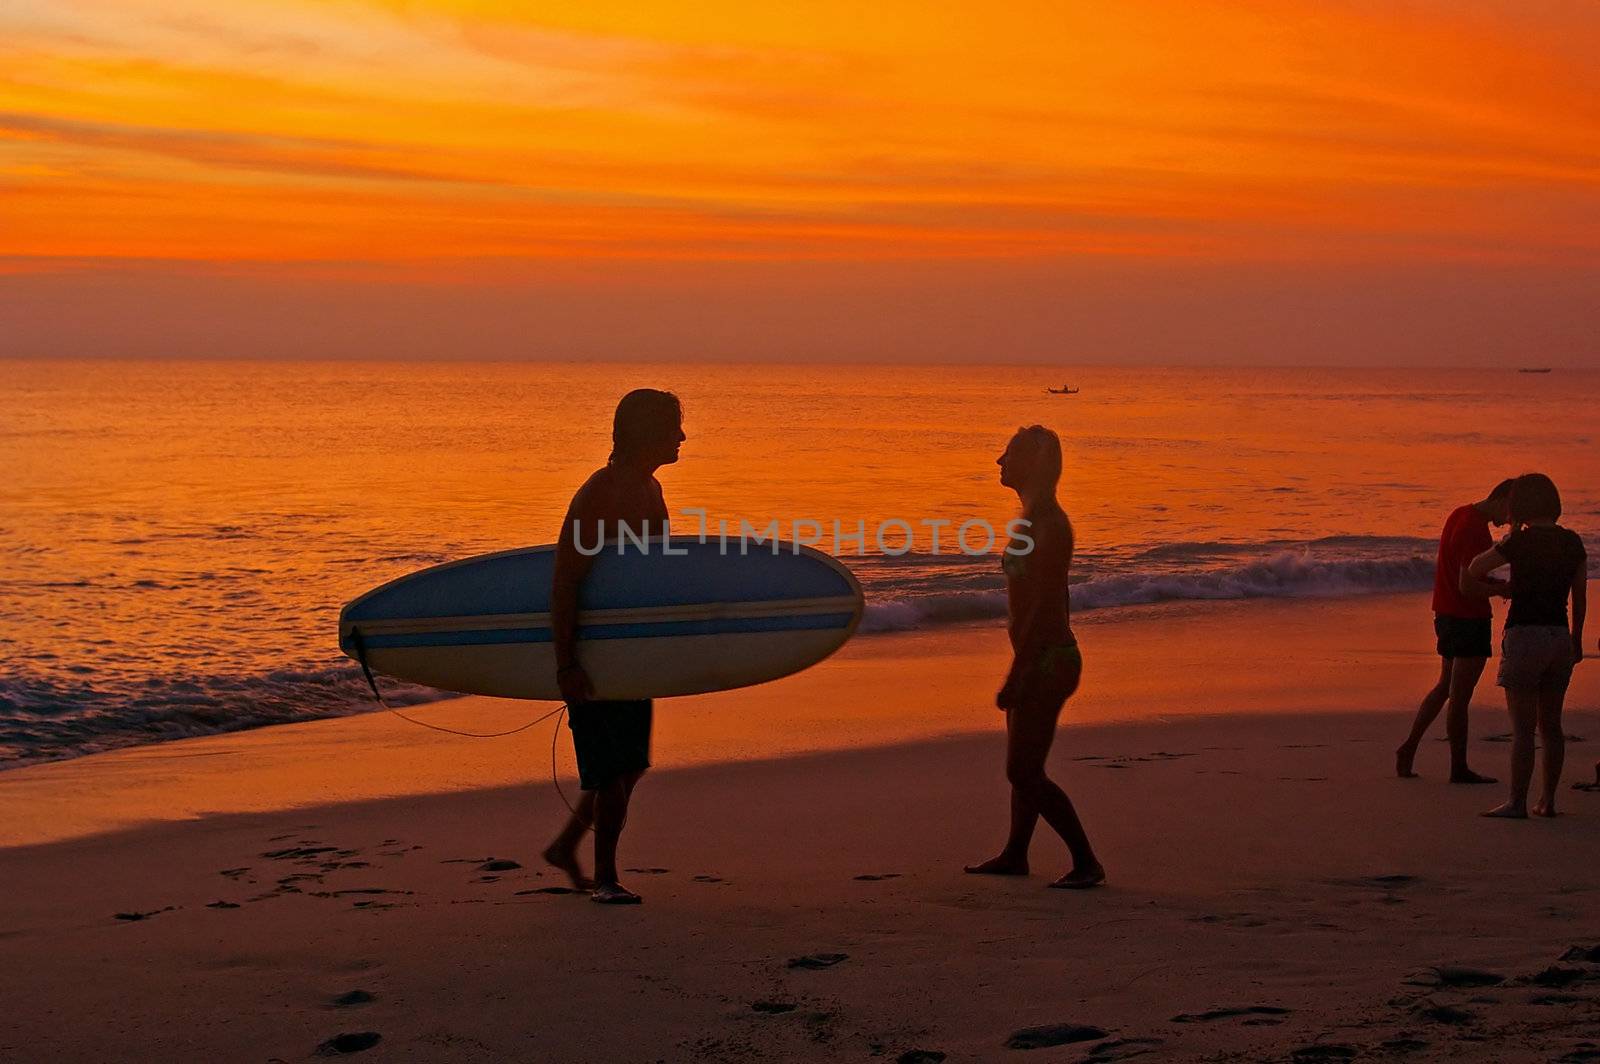 Tourists on the beach at sunset, Dreamland, Bali, Indonesia.